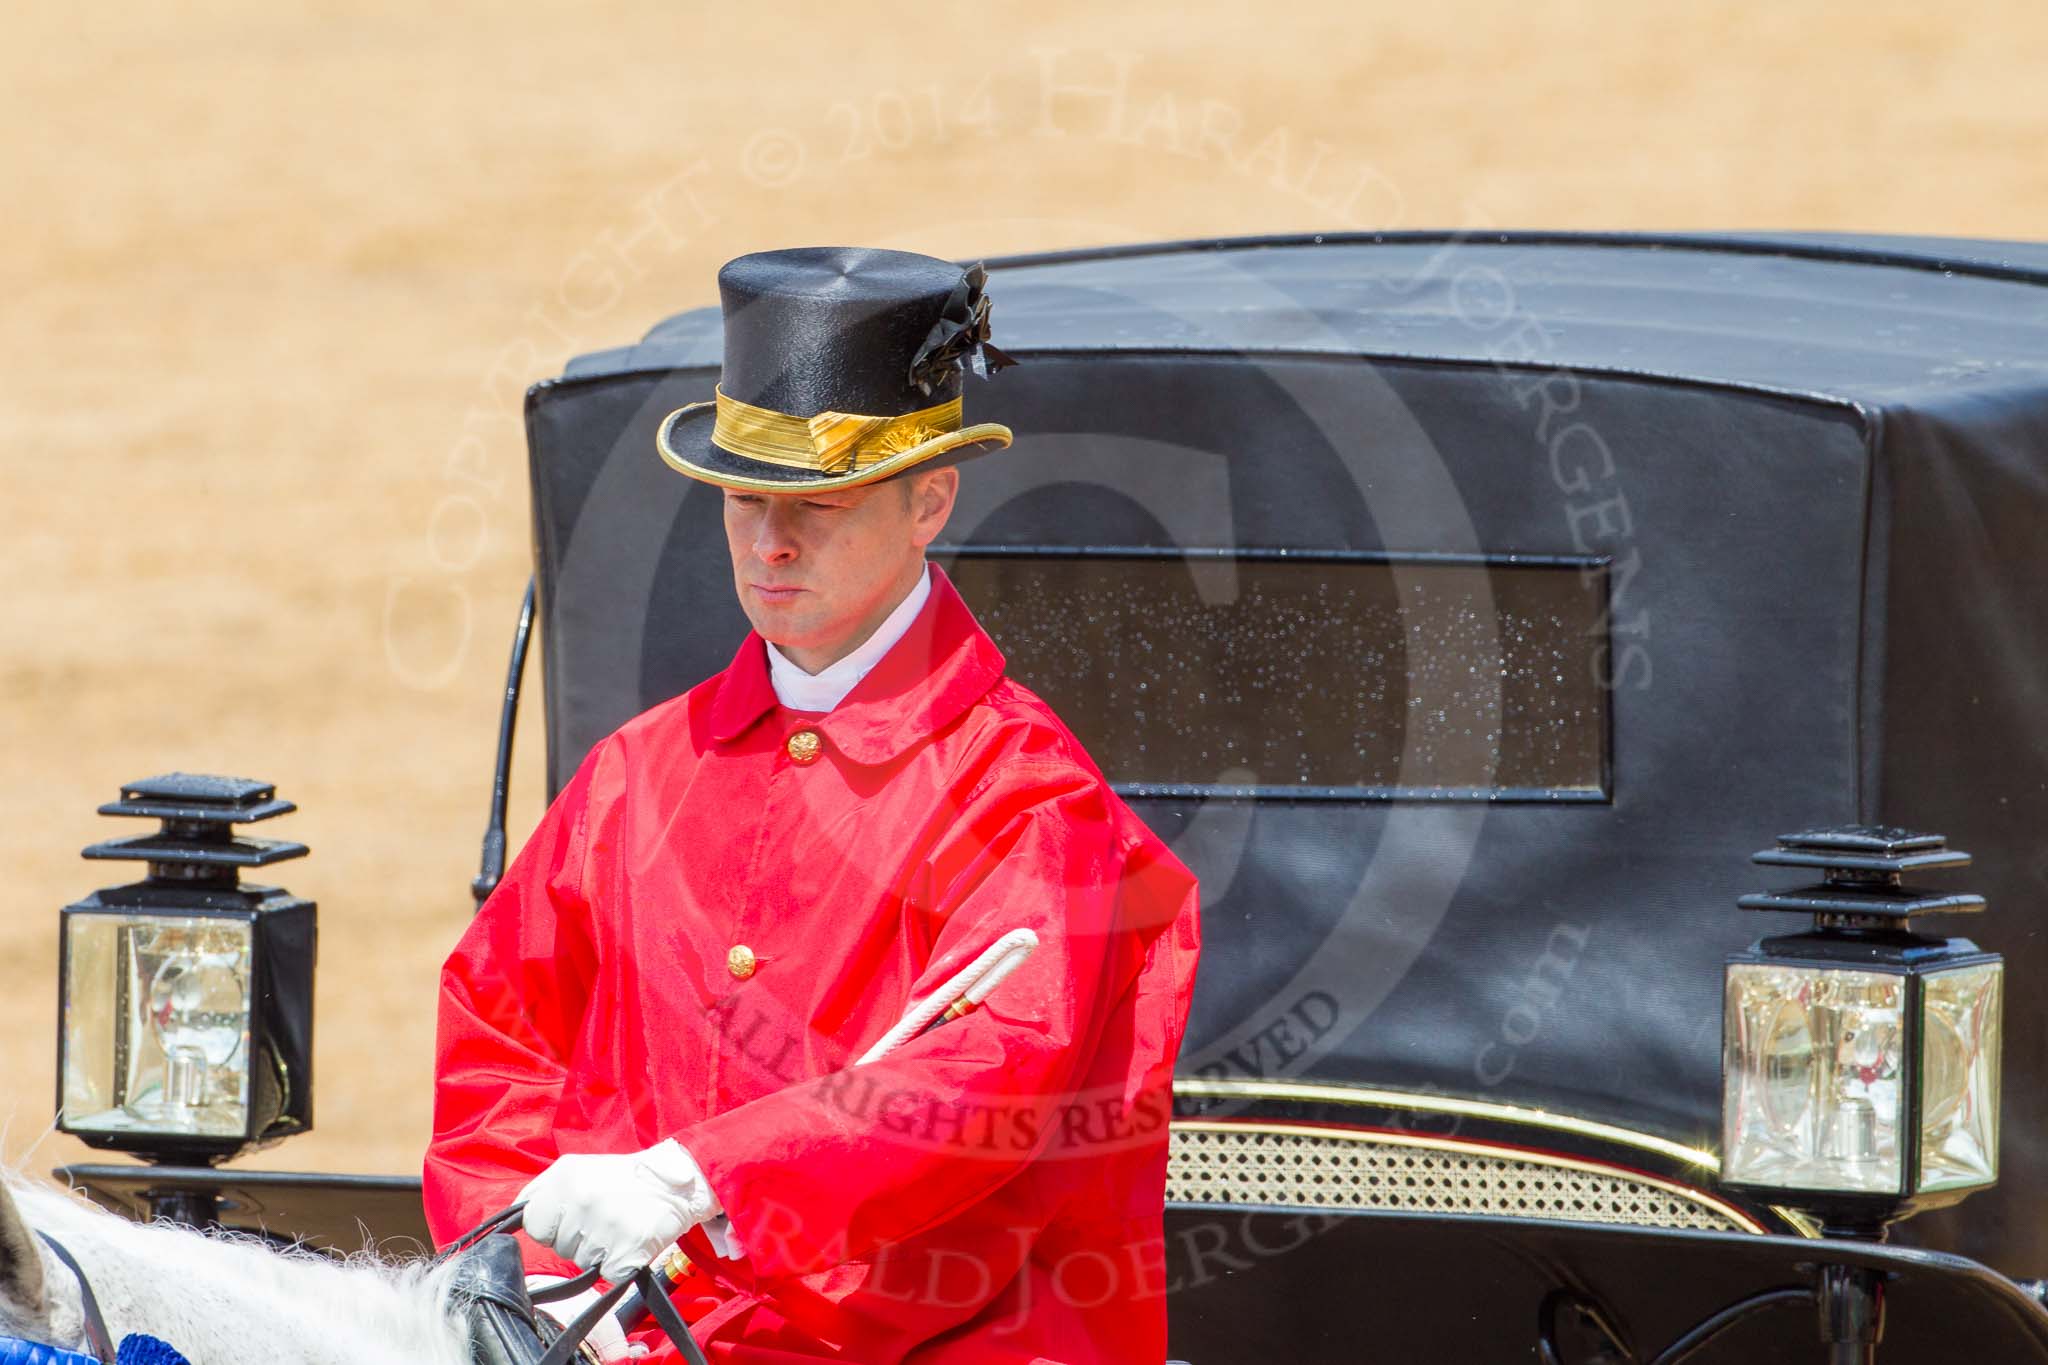 The Colonel's Review 2014.
Horse Guards Parade, Westminster,
London,

United Kingdom,
on 07 June 2014 at 12:08, image #711